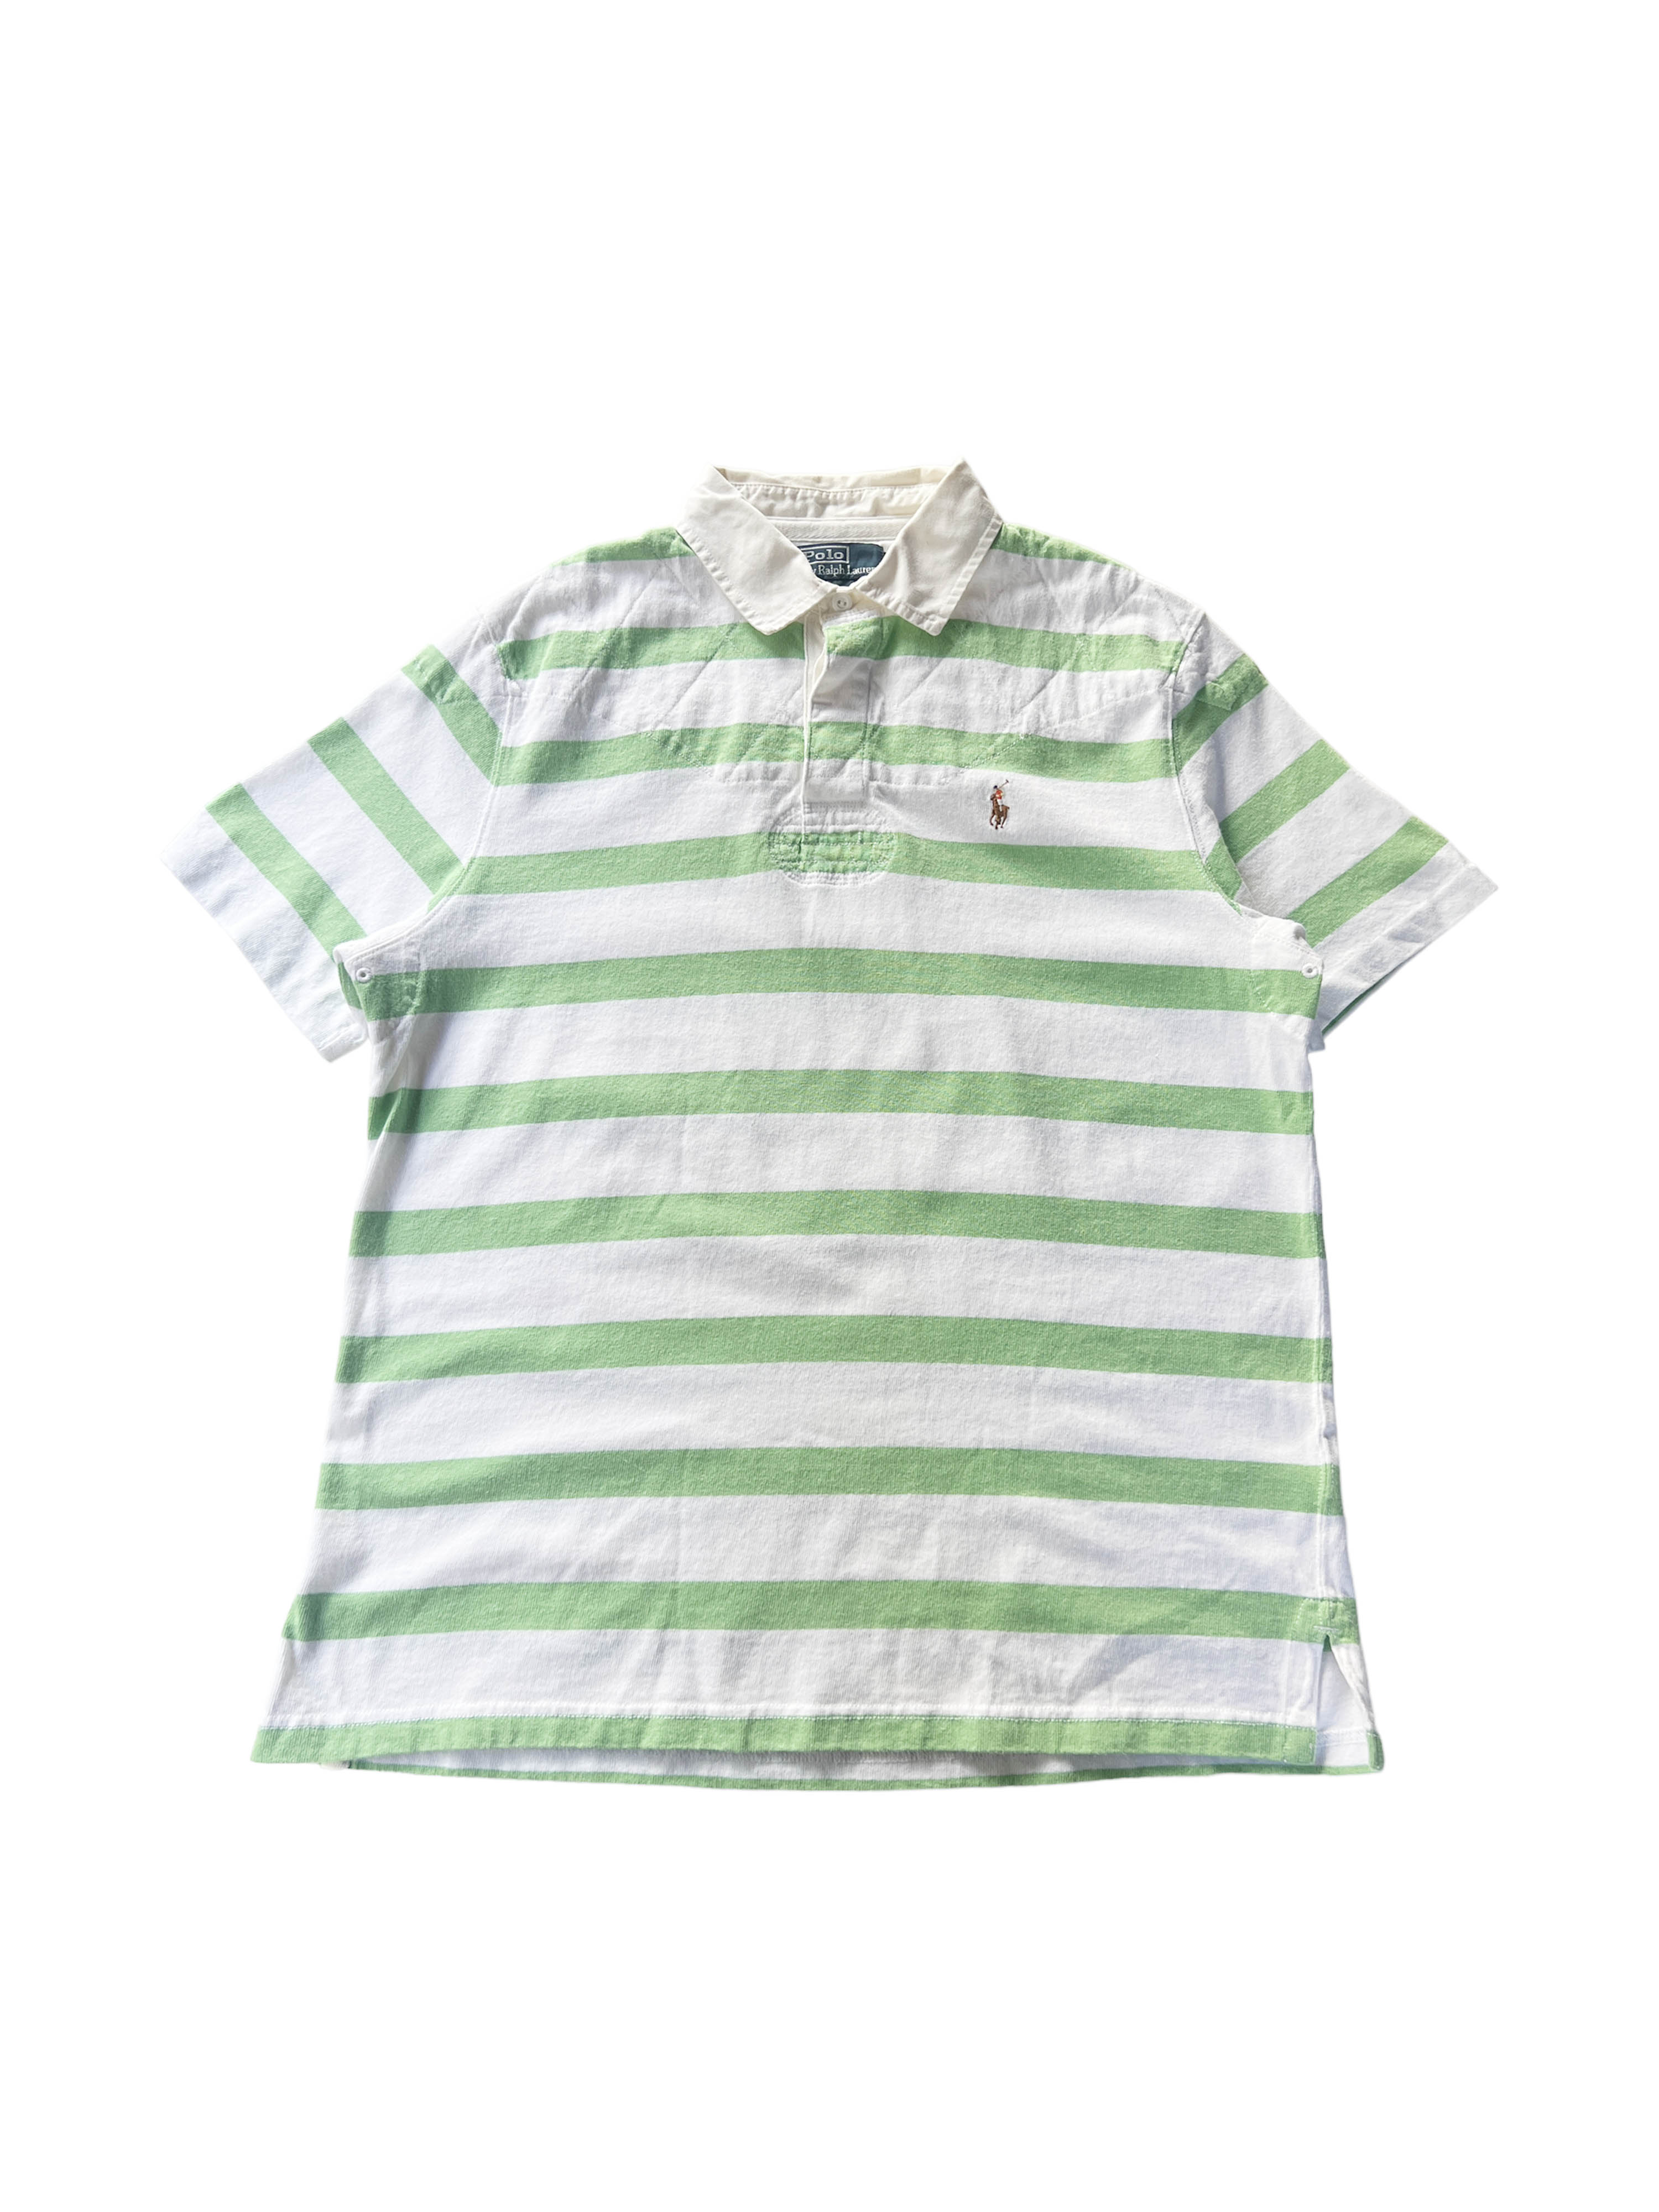 Polo by Ralph Lauren half rugby t-shirts